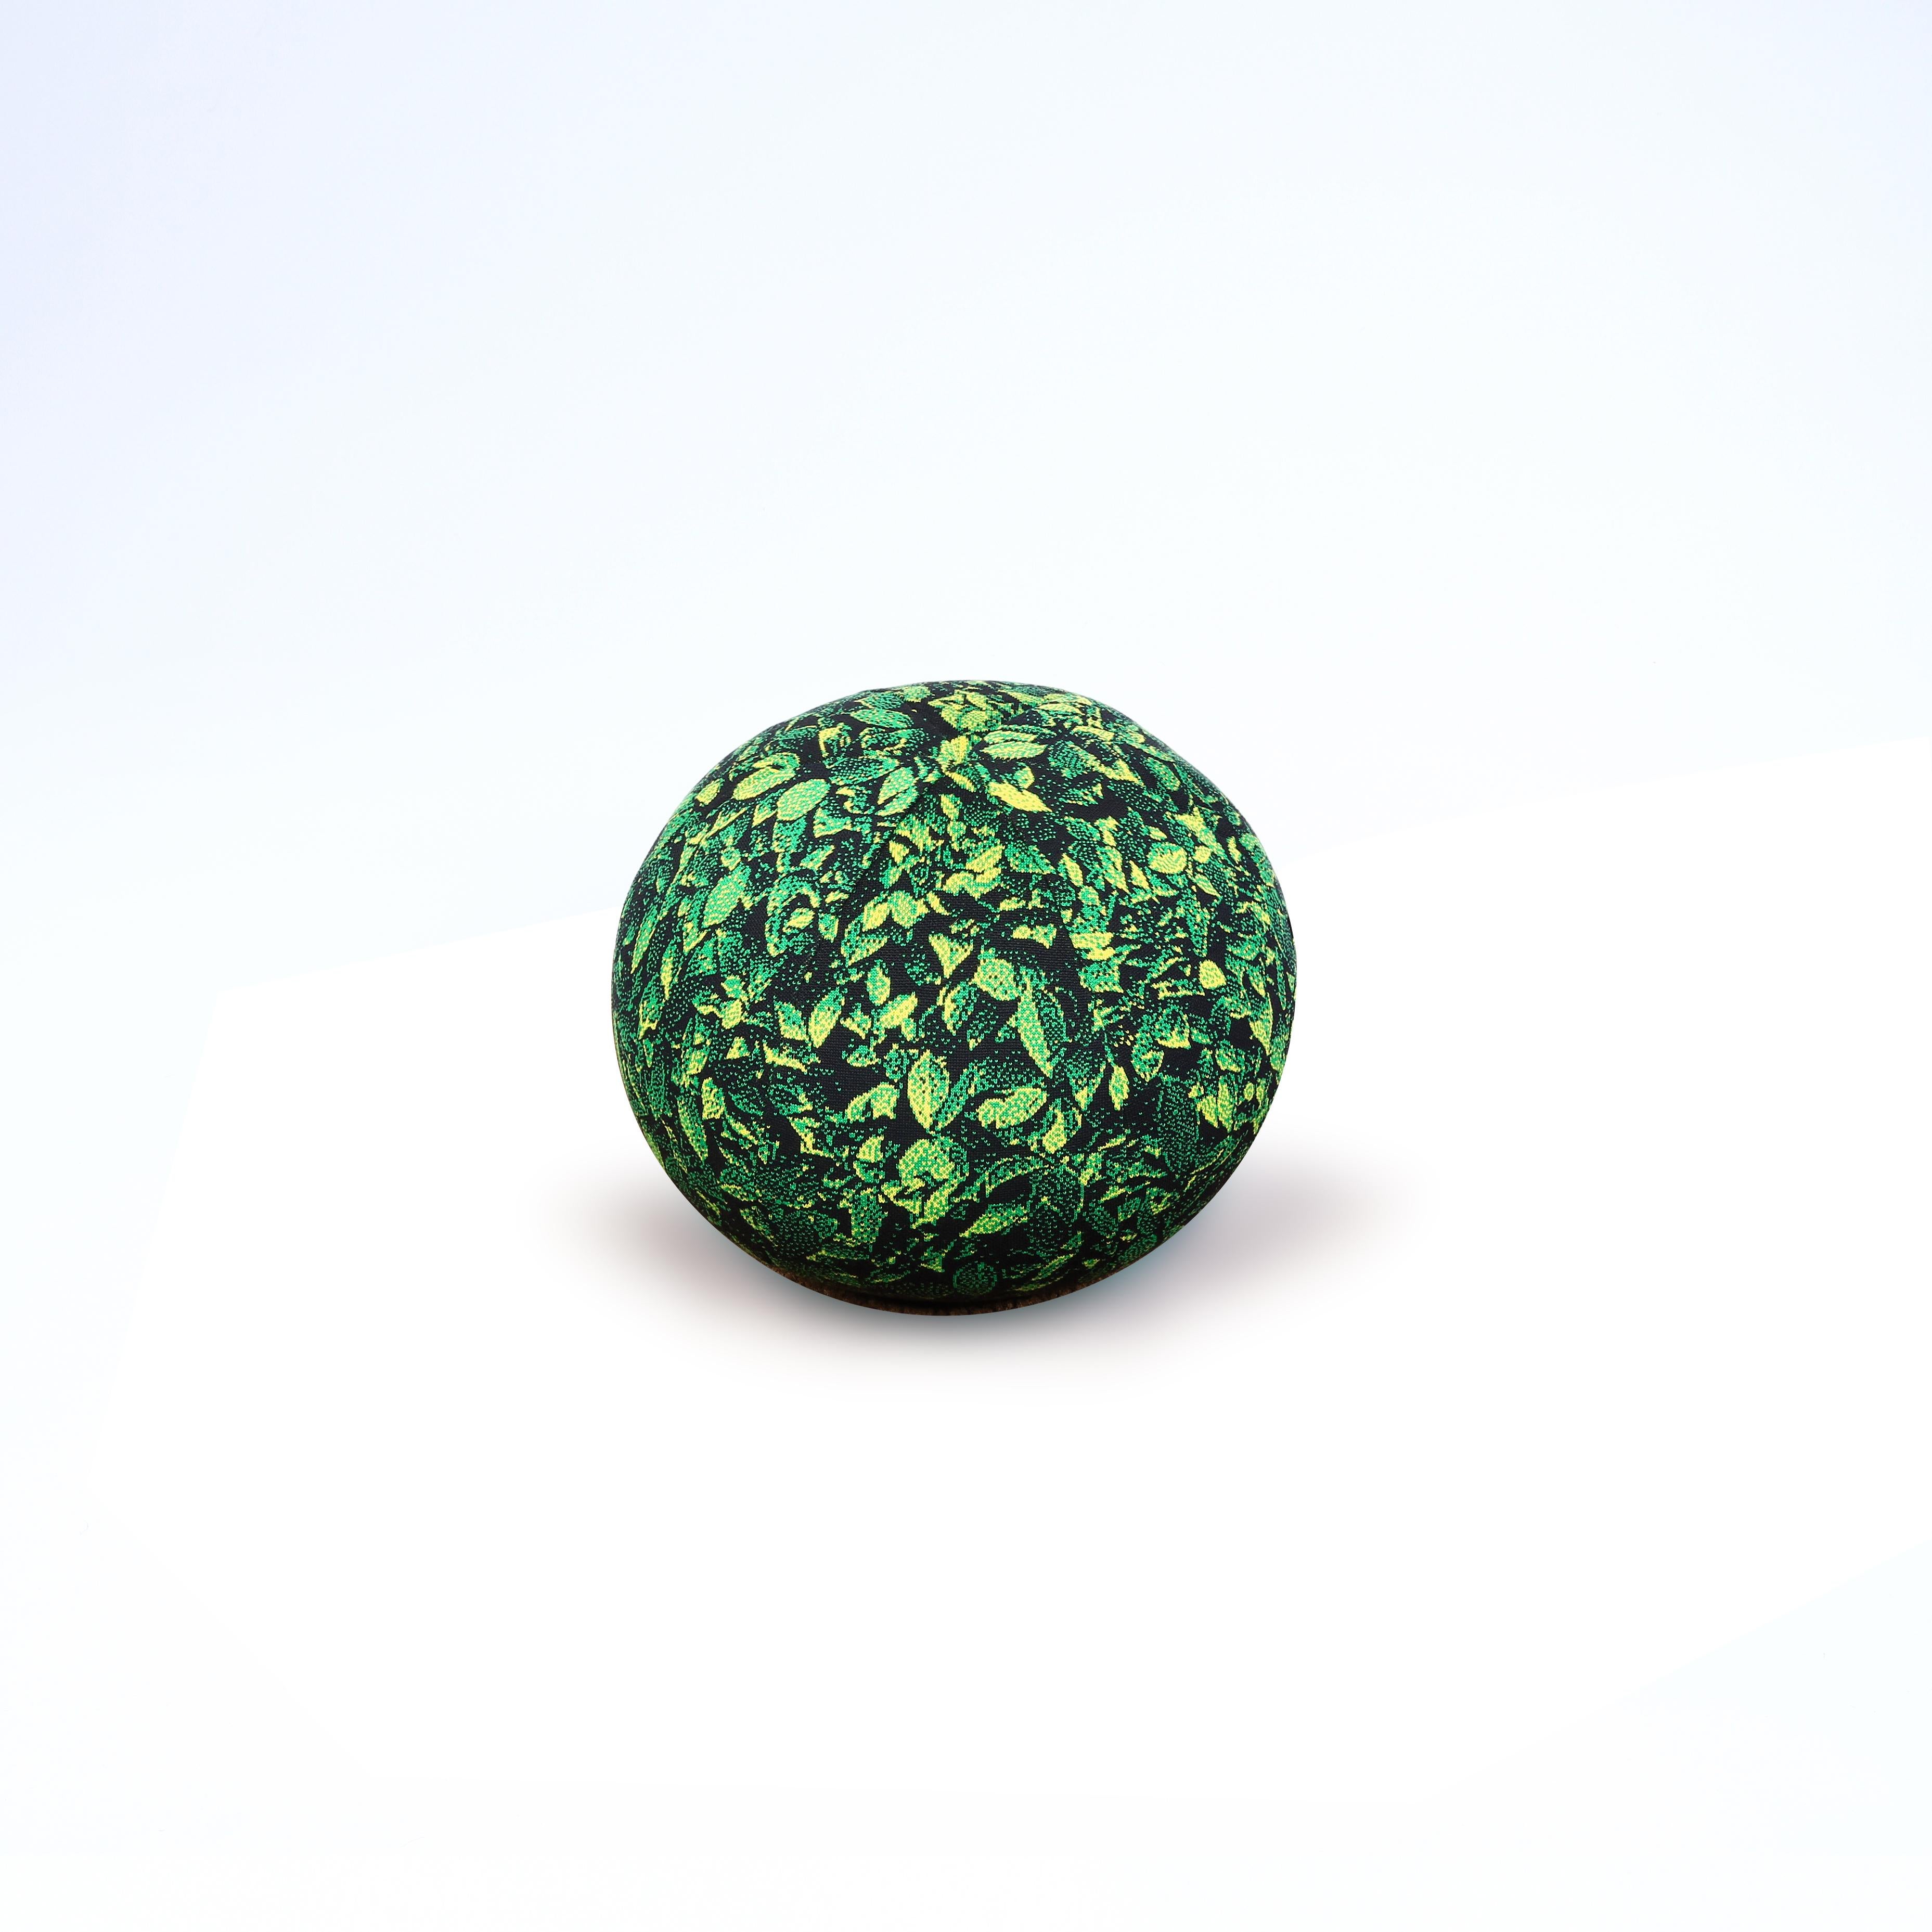 Topiary Ball - Ficus  knitted pixeled pillow small - Textile - Pillows
Ficus Shape Pillow, meticulously crafted to resemble Ficus. The intricate graphics on this pillow are not merely printed but knitted, showcasing a palette of five different